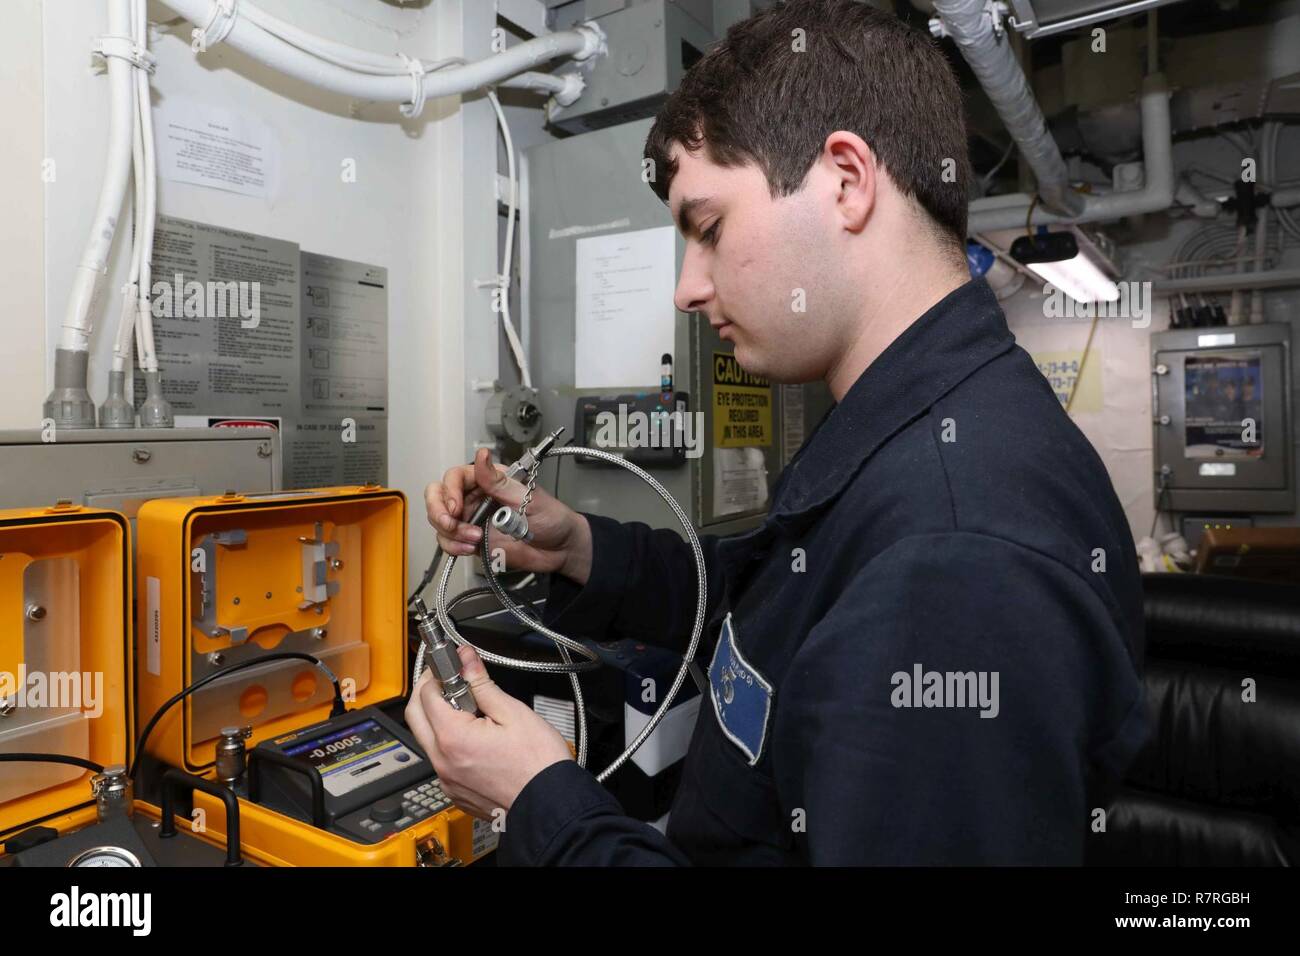 5TH FLEET AREA OF OPERATION (March 30, 2017) Aviation Electronics Technician Airman Andrew Decataor Wear, performs maintenance on an automated pressure calibrator in the calibration shop aboard the amphibious assault ship USS Bataan (LHD 5). The ship is currently deployed with the Bataan Amphibious Ready Group in support of maritime security operations and theater security cooperation efforts in the U.S. 5th Fleet area of operations. Stock Photo